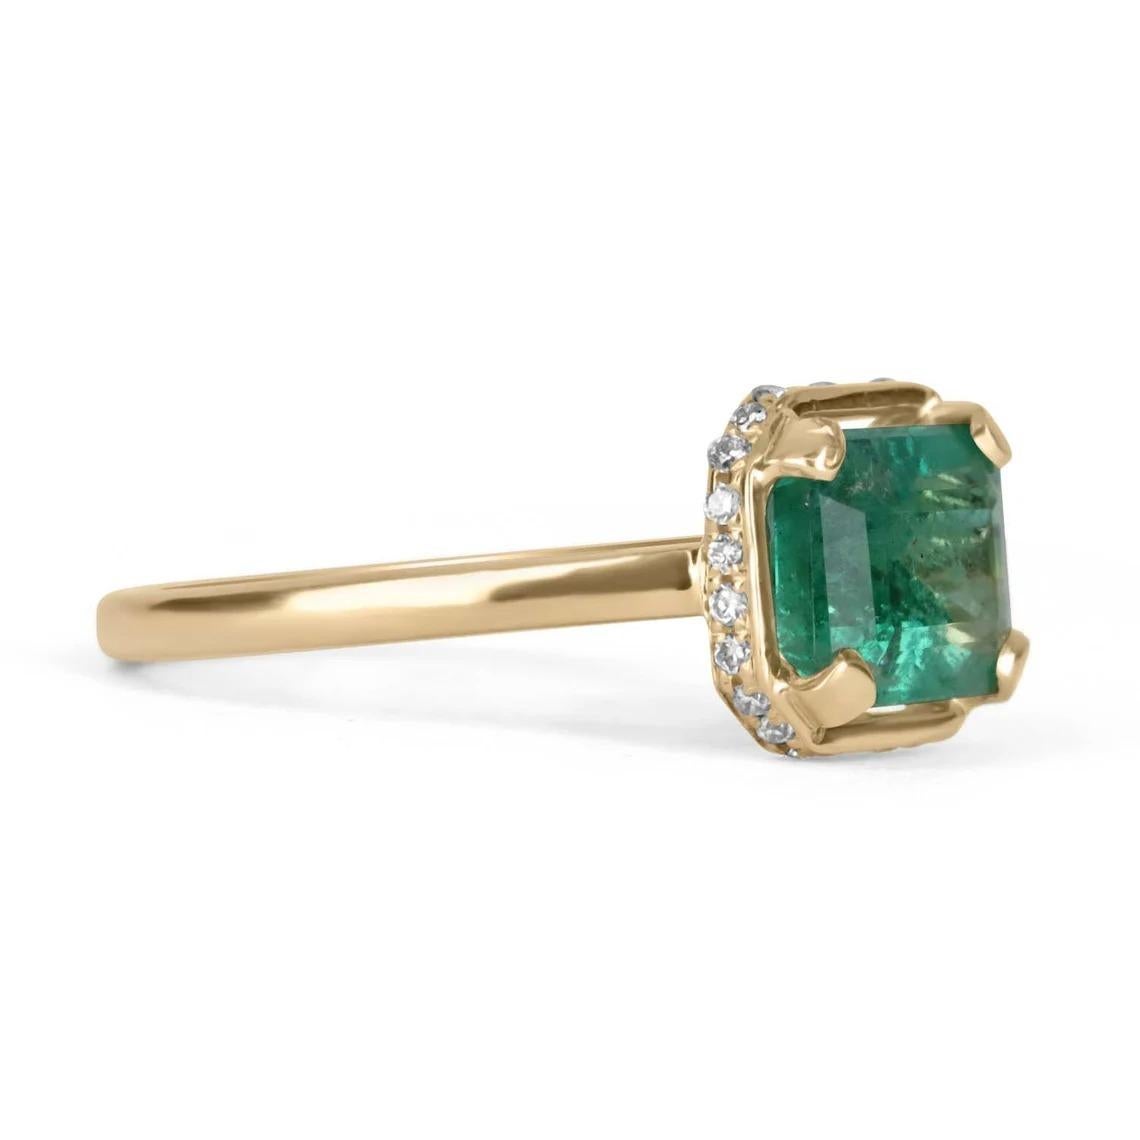 Showcased is a modern, emerald, and diamond accent solitaire ring. This solitaire carries a full 0.80-carat natural emerald cut-Colombian emerald. This gemstone is fully faceted and has an excellent shine. Diamonds accent the ring from the side